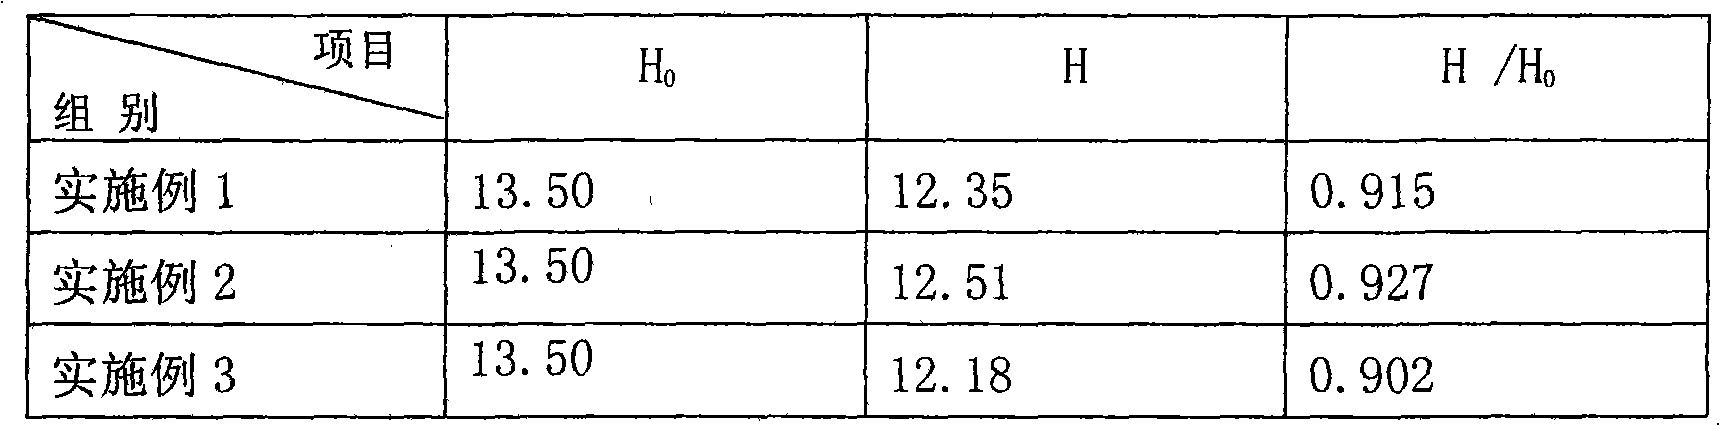 Coccidiostat-decoquinate dry suspension for livestock and poultry and preparation method thereof